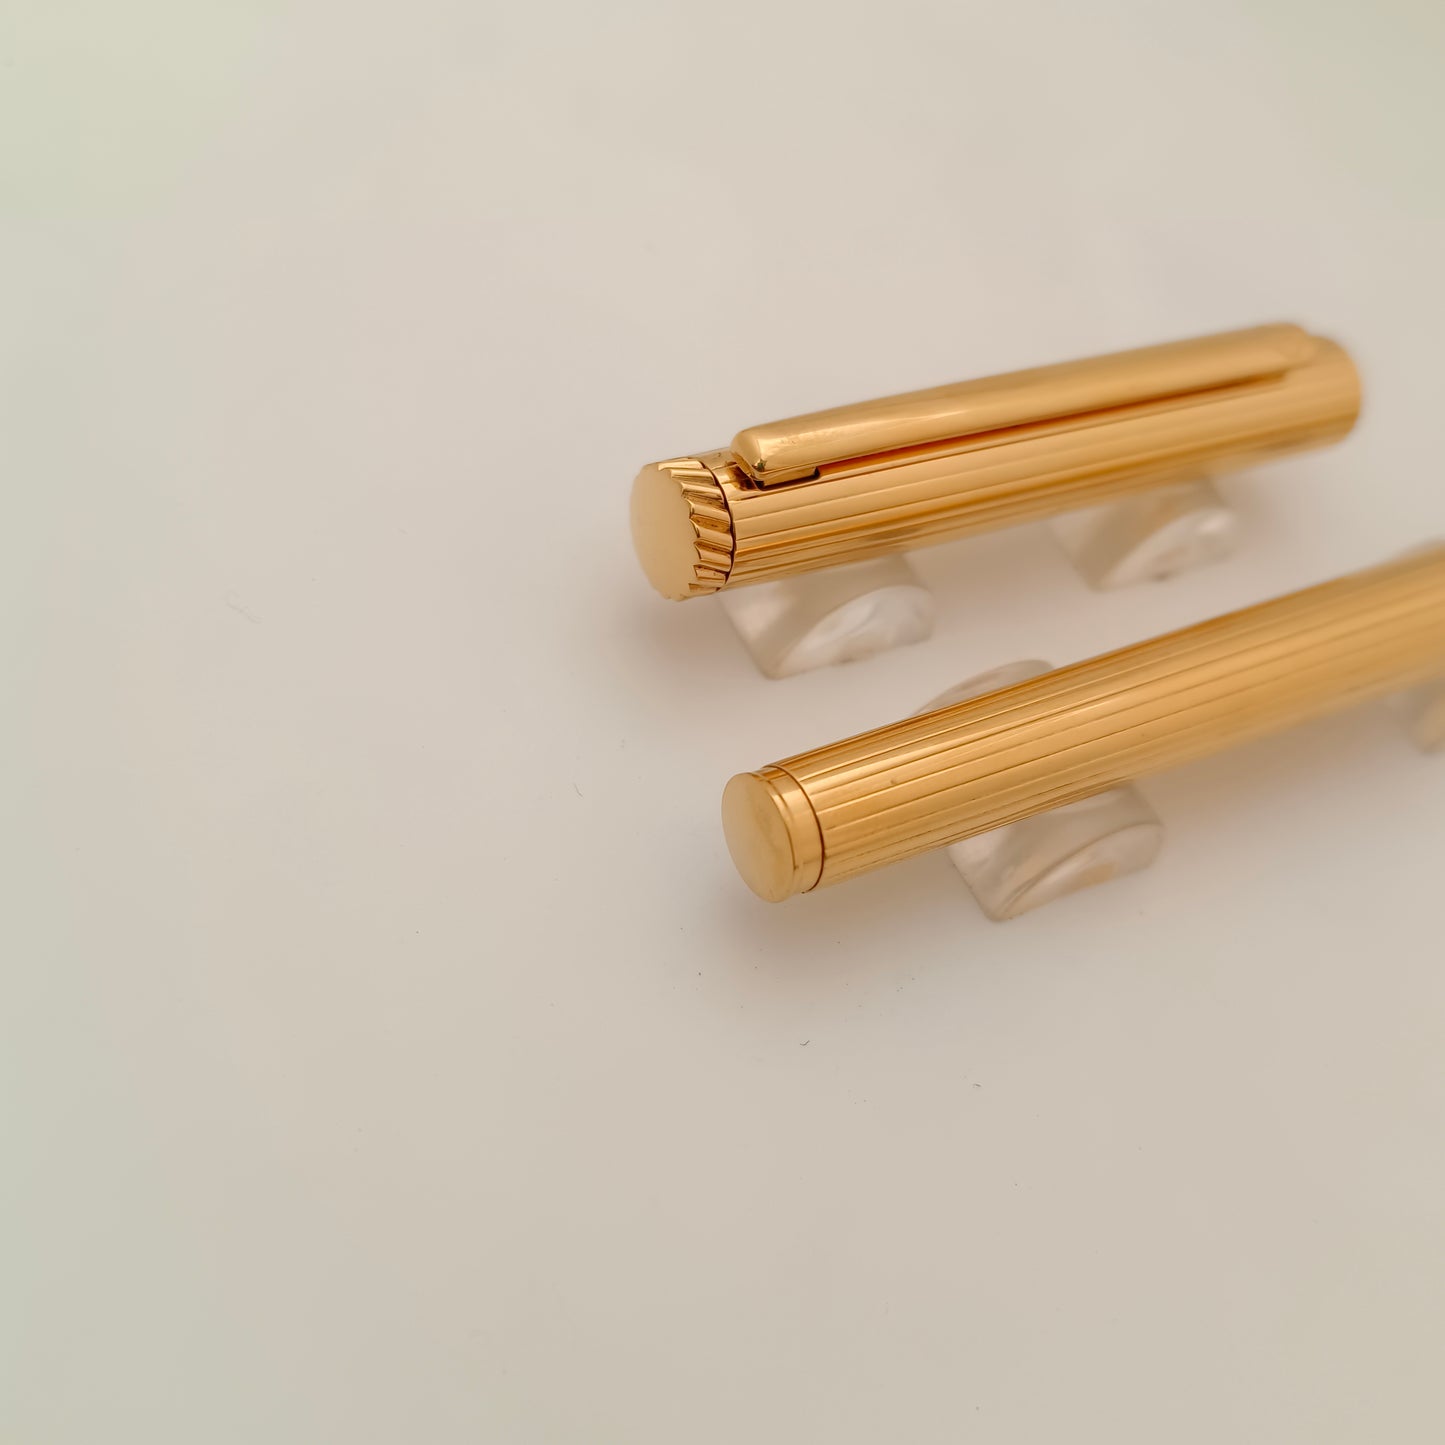 Alfred Dunhill Gemline Gold Plated Fountain Pen